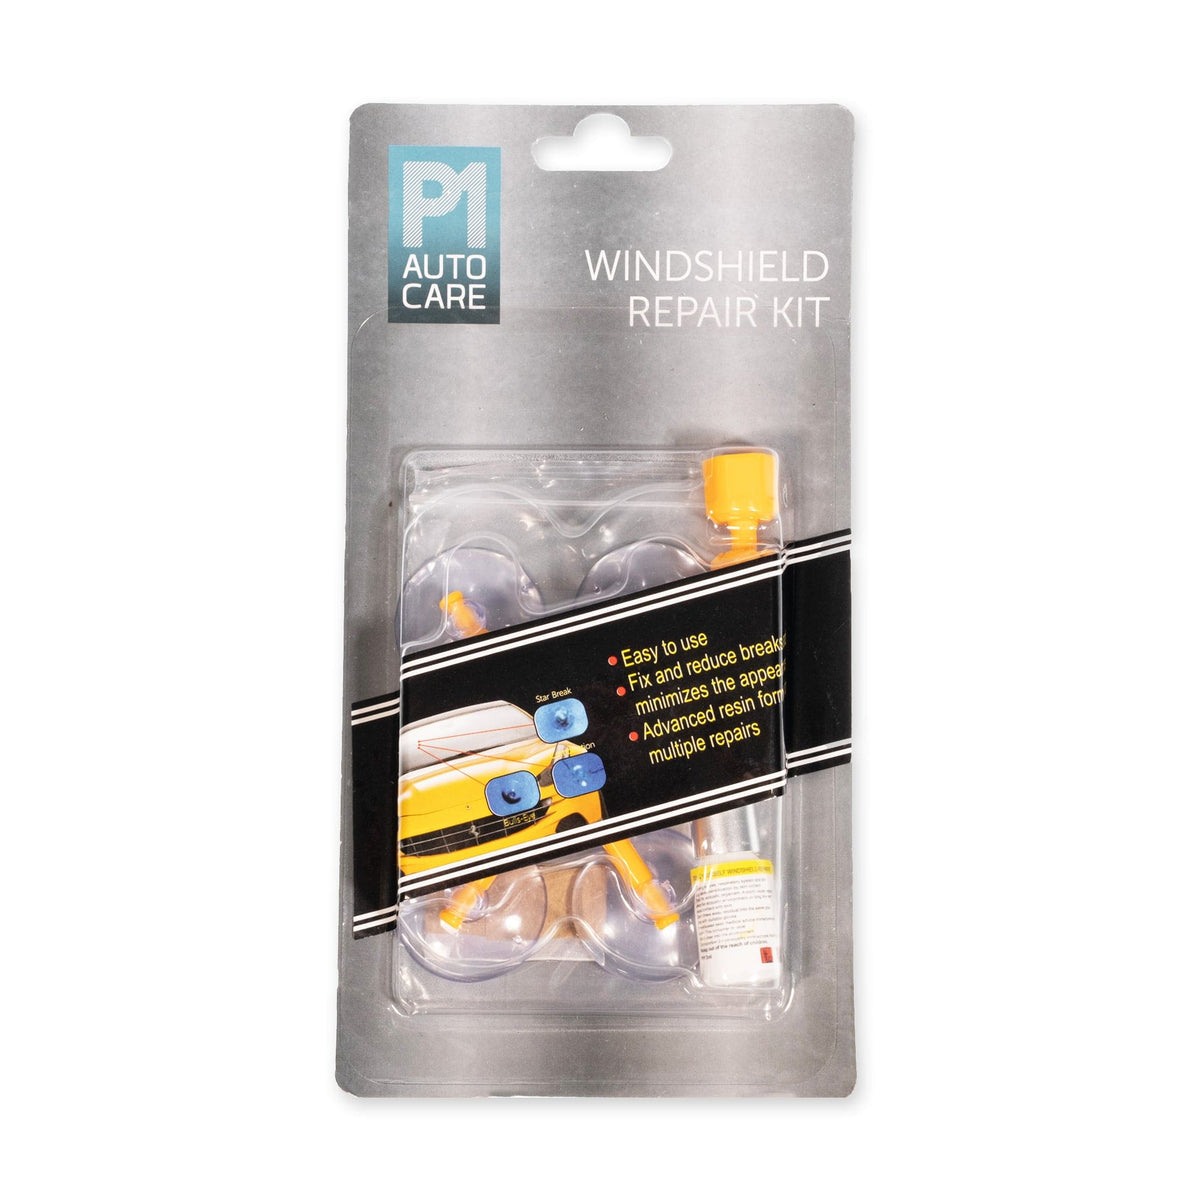 P1 Autocare© Windshield Repair Kit – Your First Line of Defence Against Windshield Damage